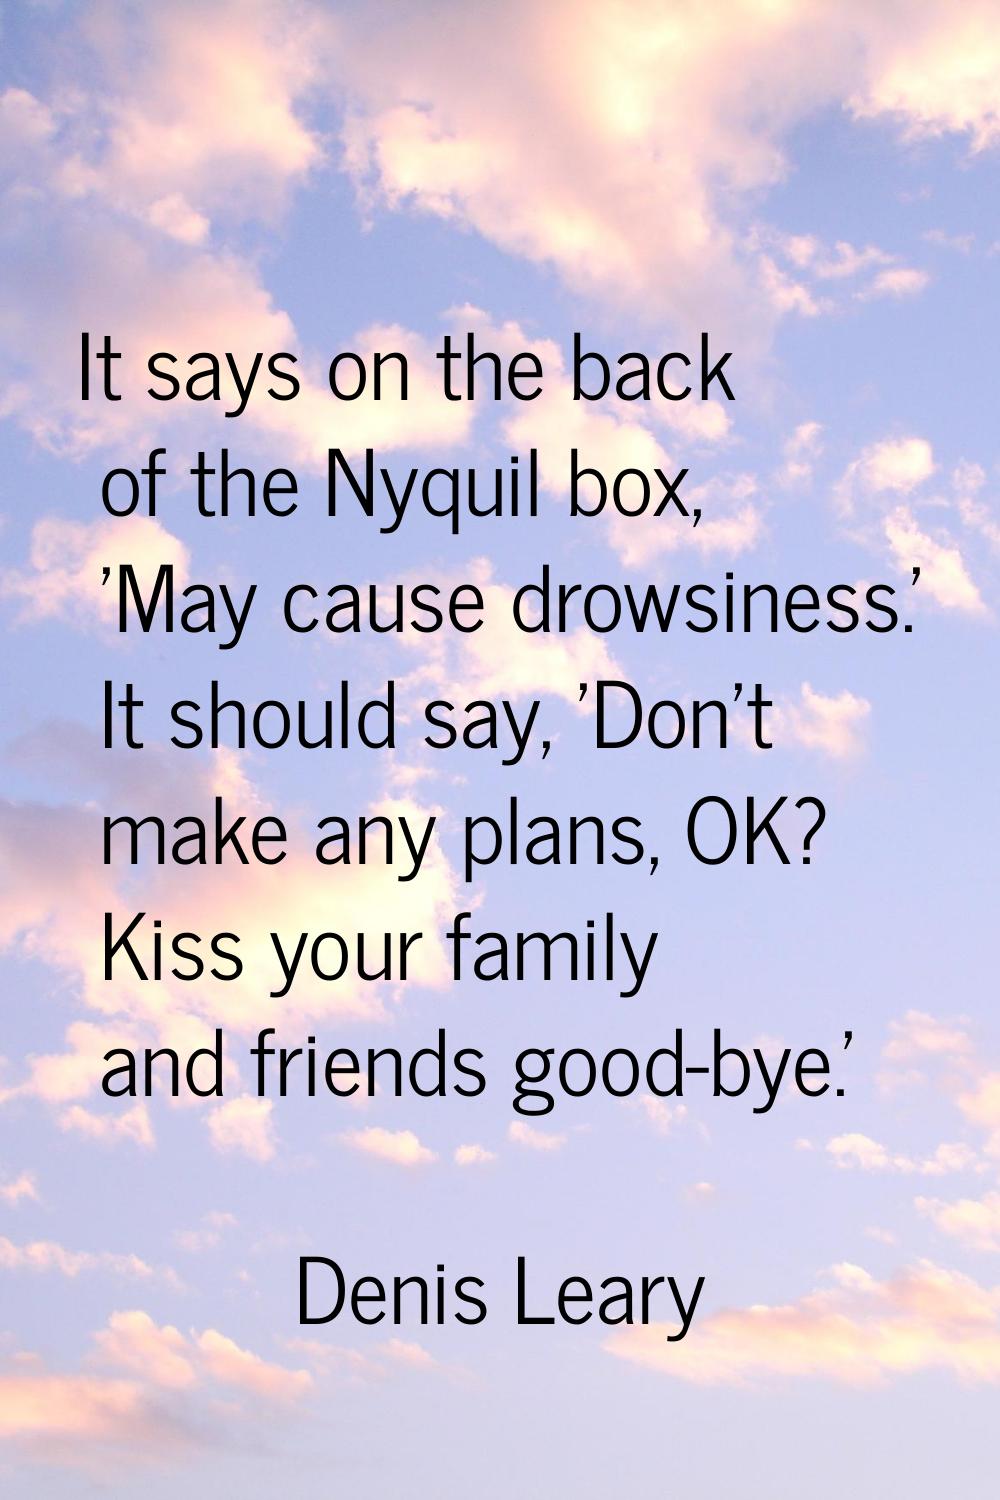 It says on the back of the Nyquil box, 'May cause drowsiness.' It should say, 'Don't make any plans